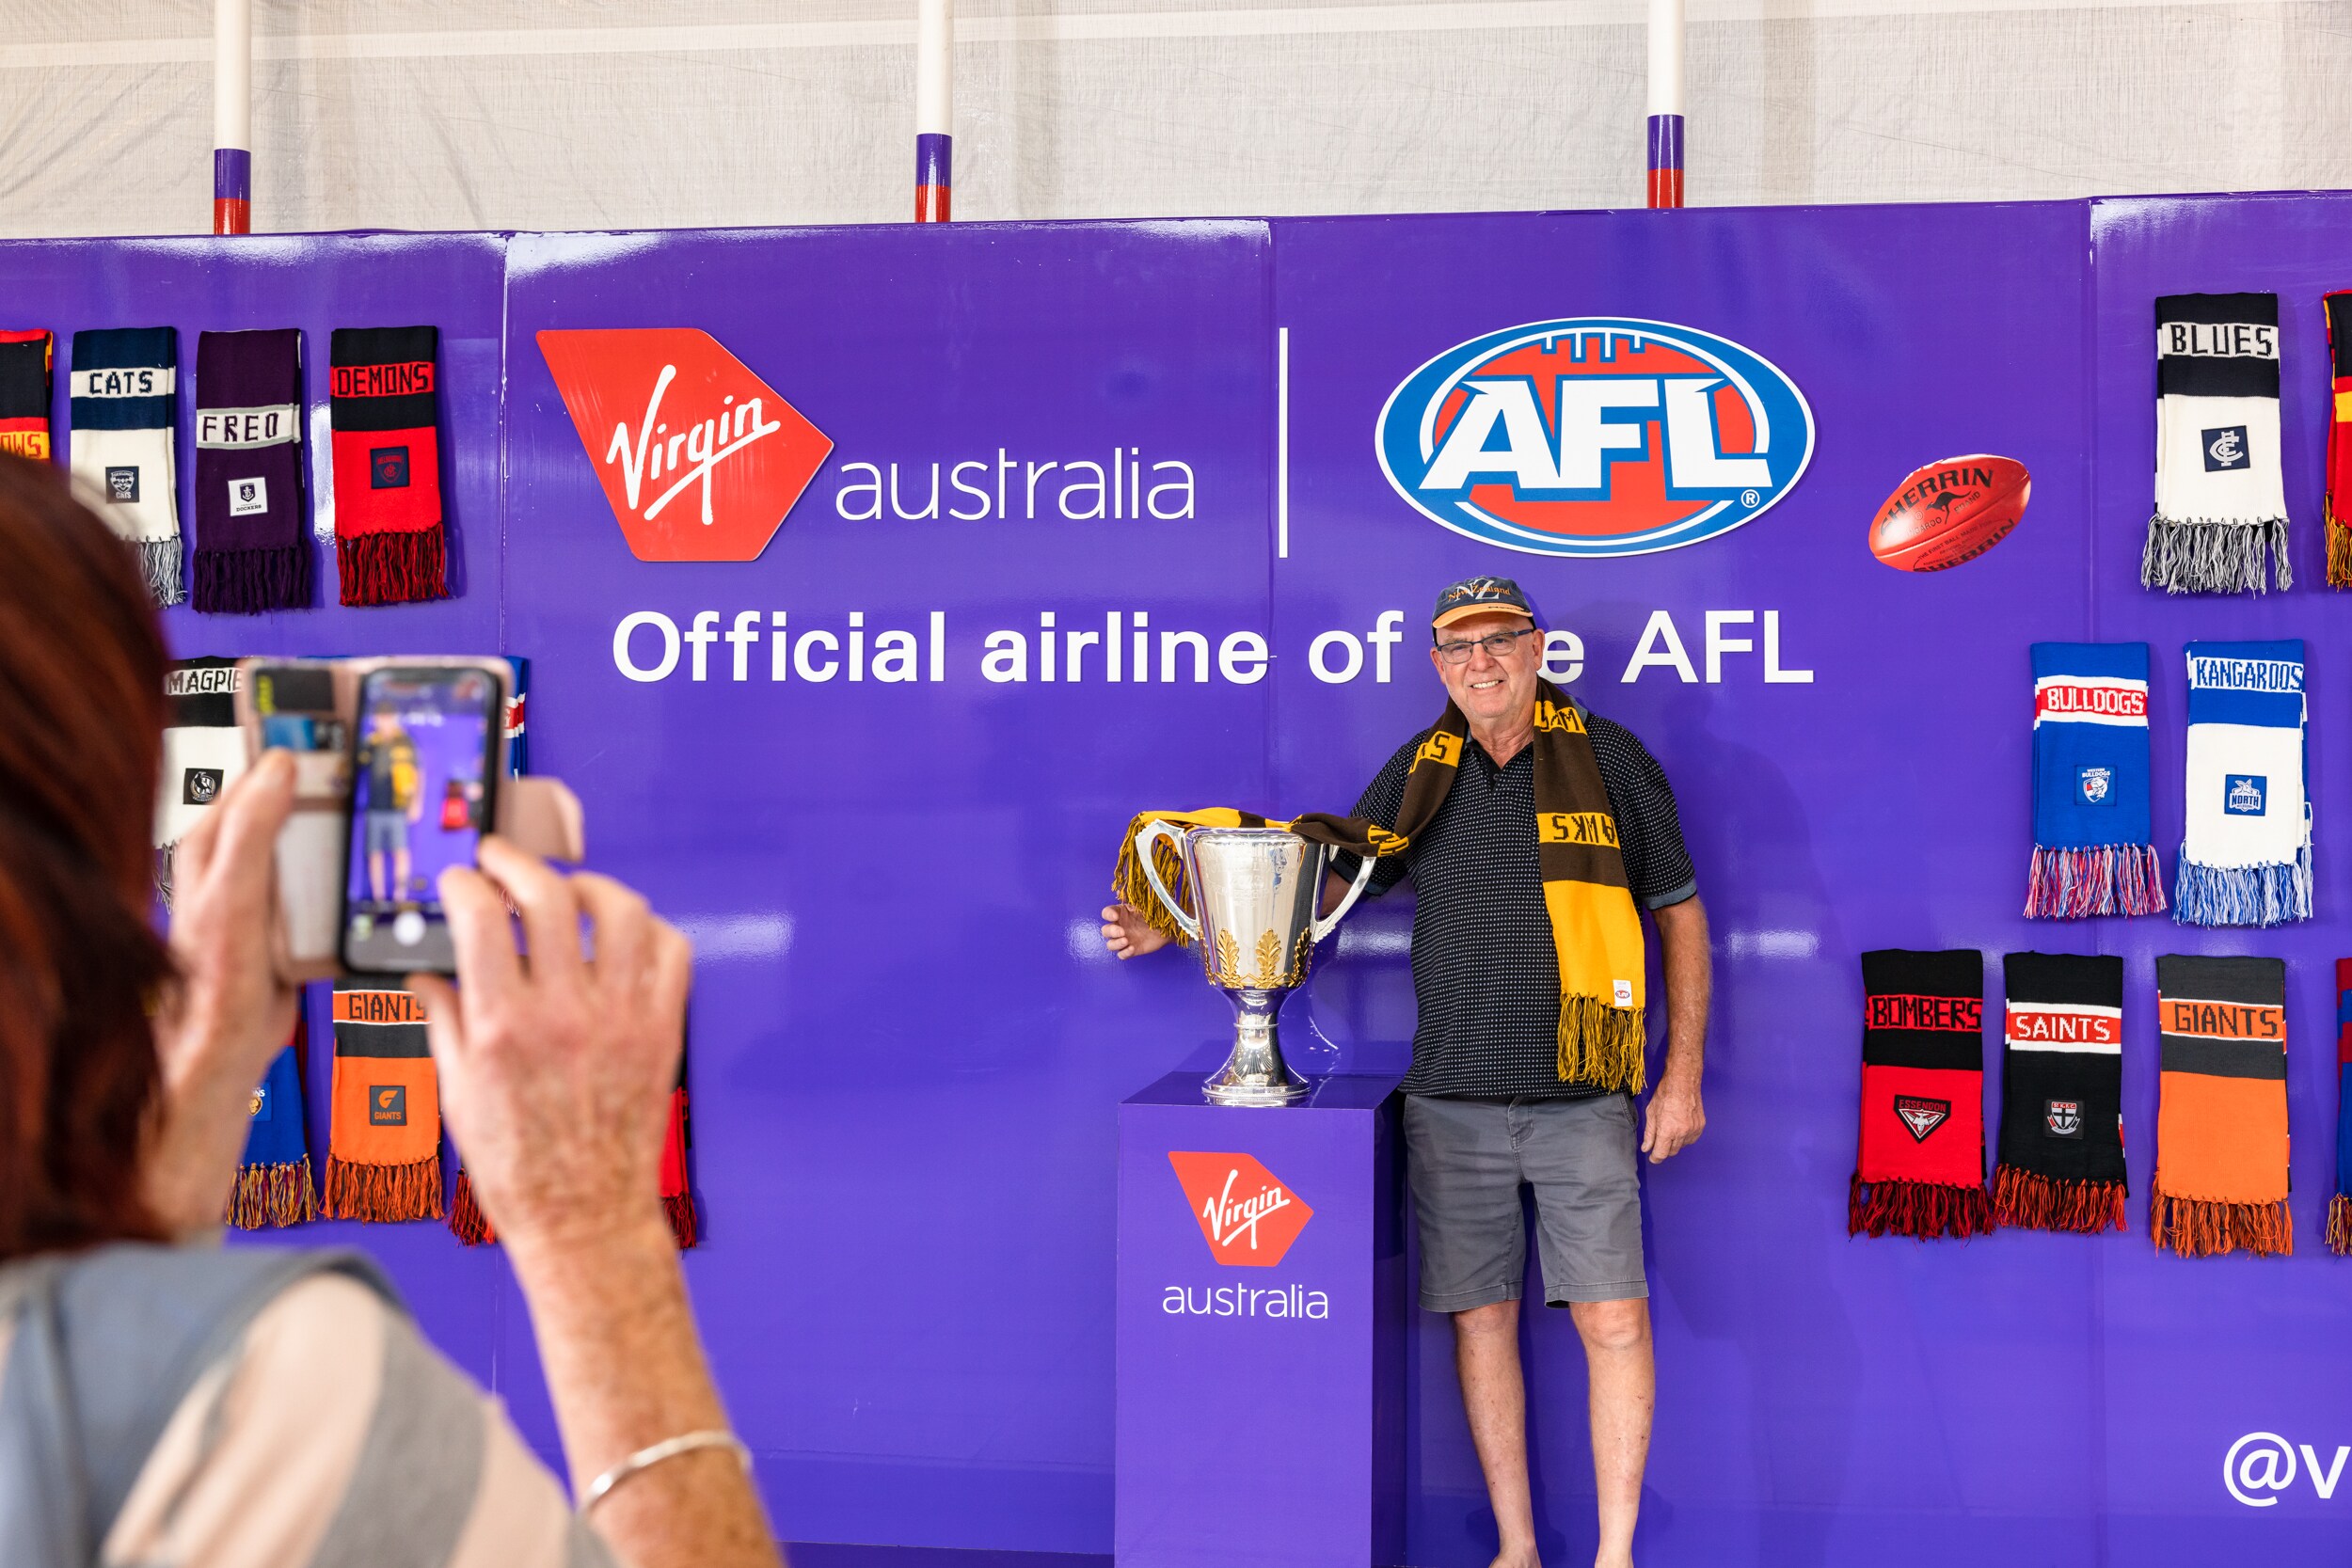 Hawthorn Football Club supporter standing proudly in front of the AFL Grand Final trophy